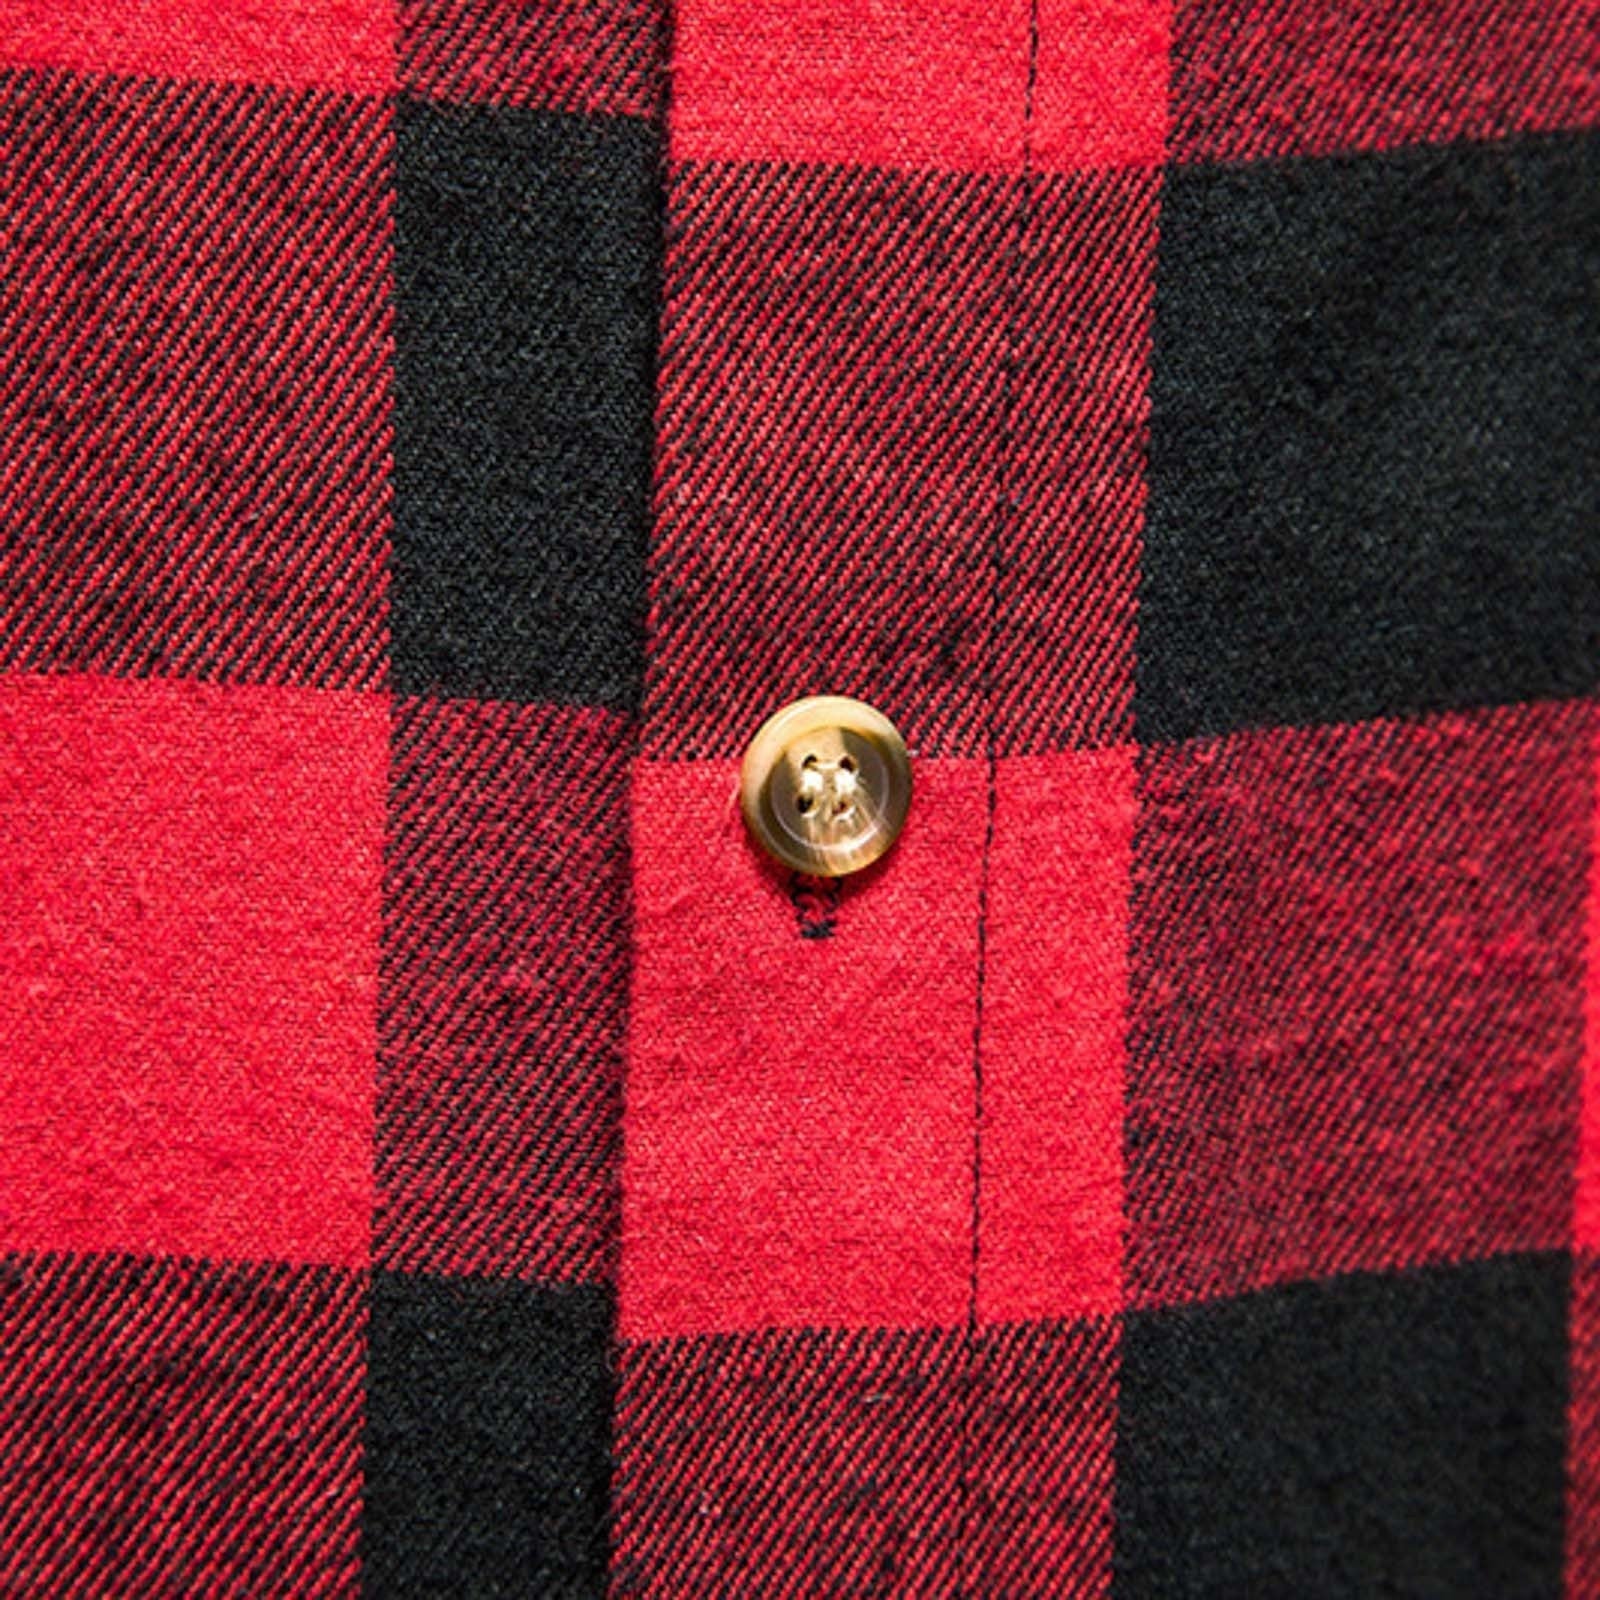 Two tone buttons on red flannelette shirt.